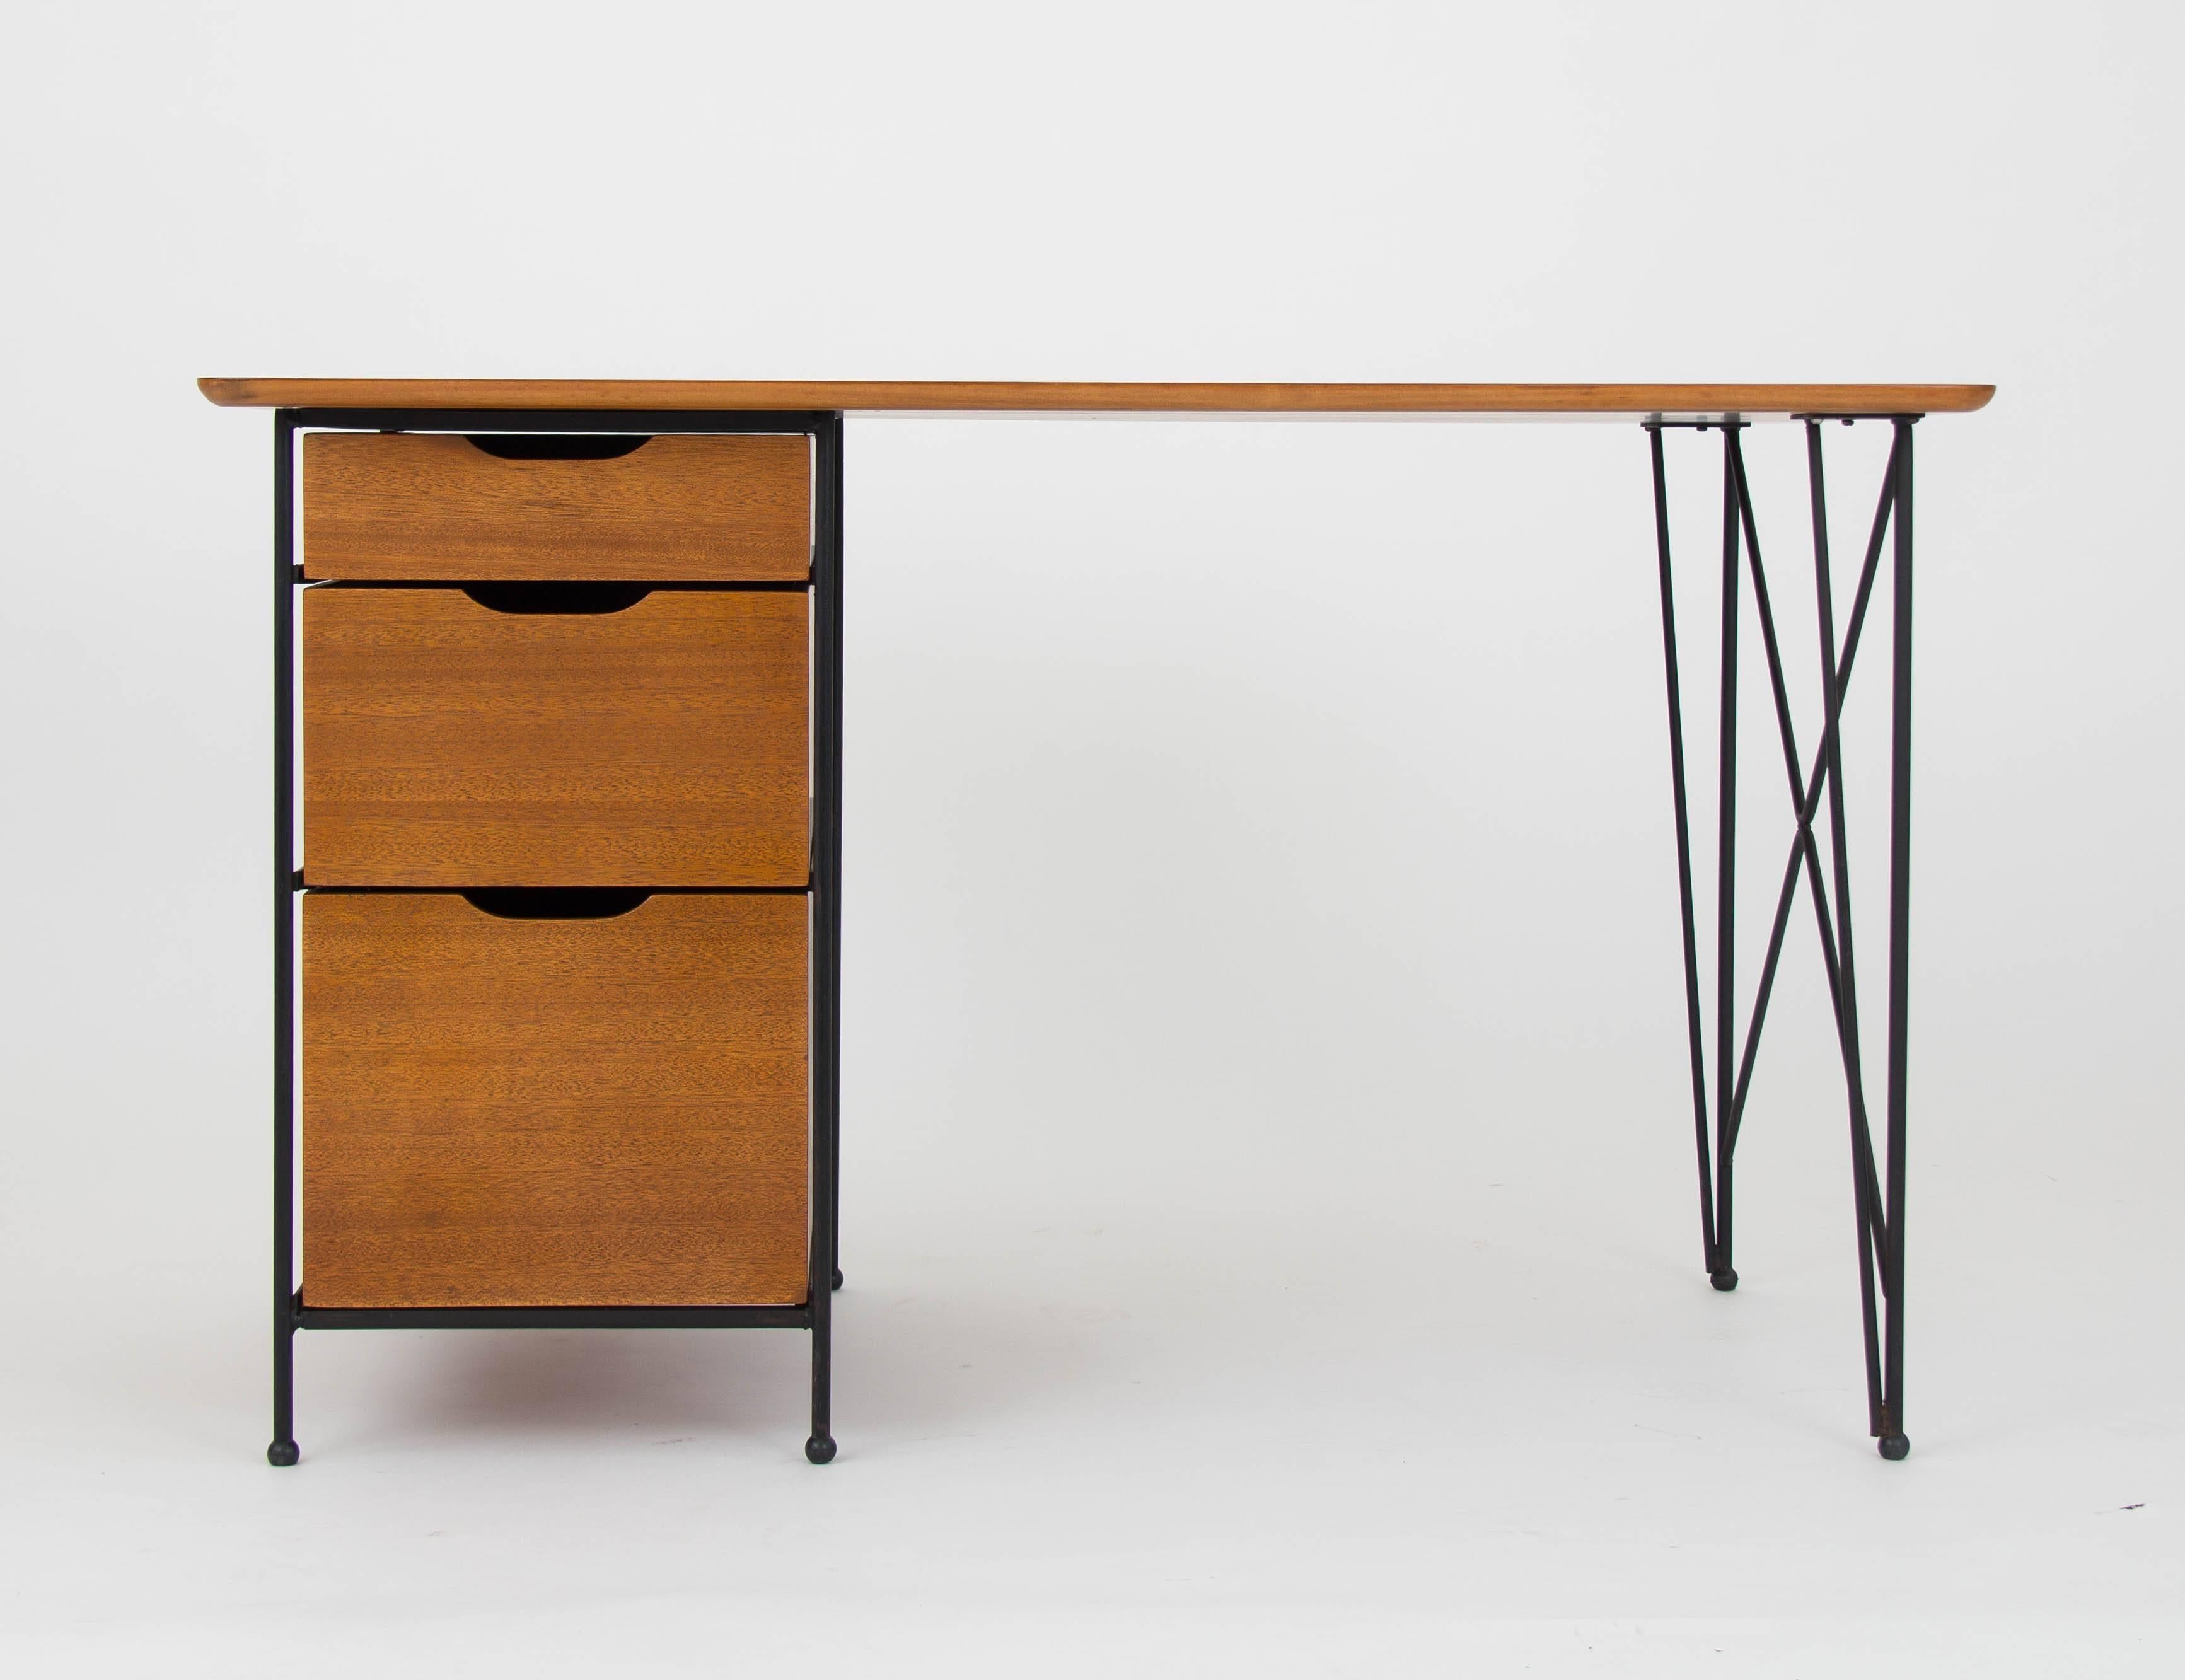 A three-drawer writing desk with minimal, modernist leanings. Produced by Vista of California, this piece has a frame of enameled steel with a work surface and drawers in mahogany wood. The left-hand drawer stack sits on exposed runners of painted